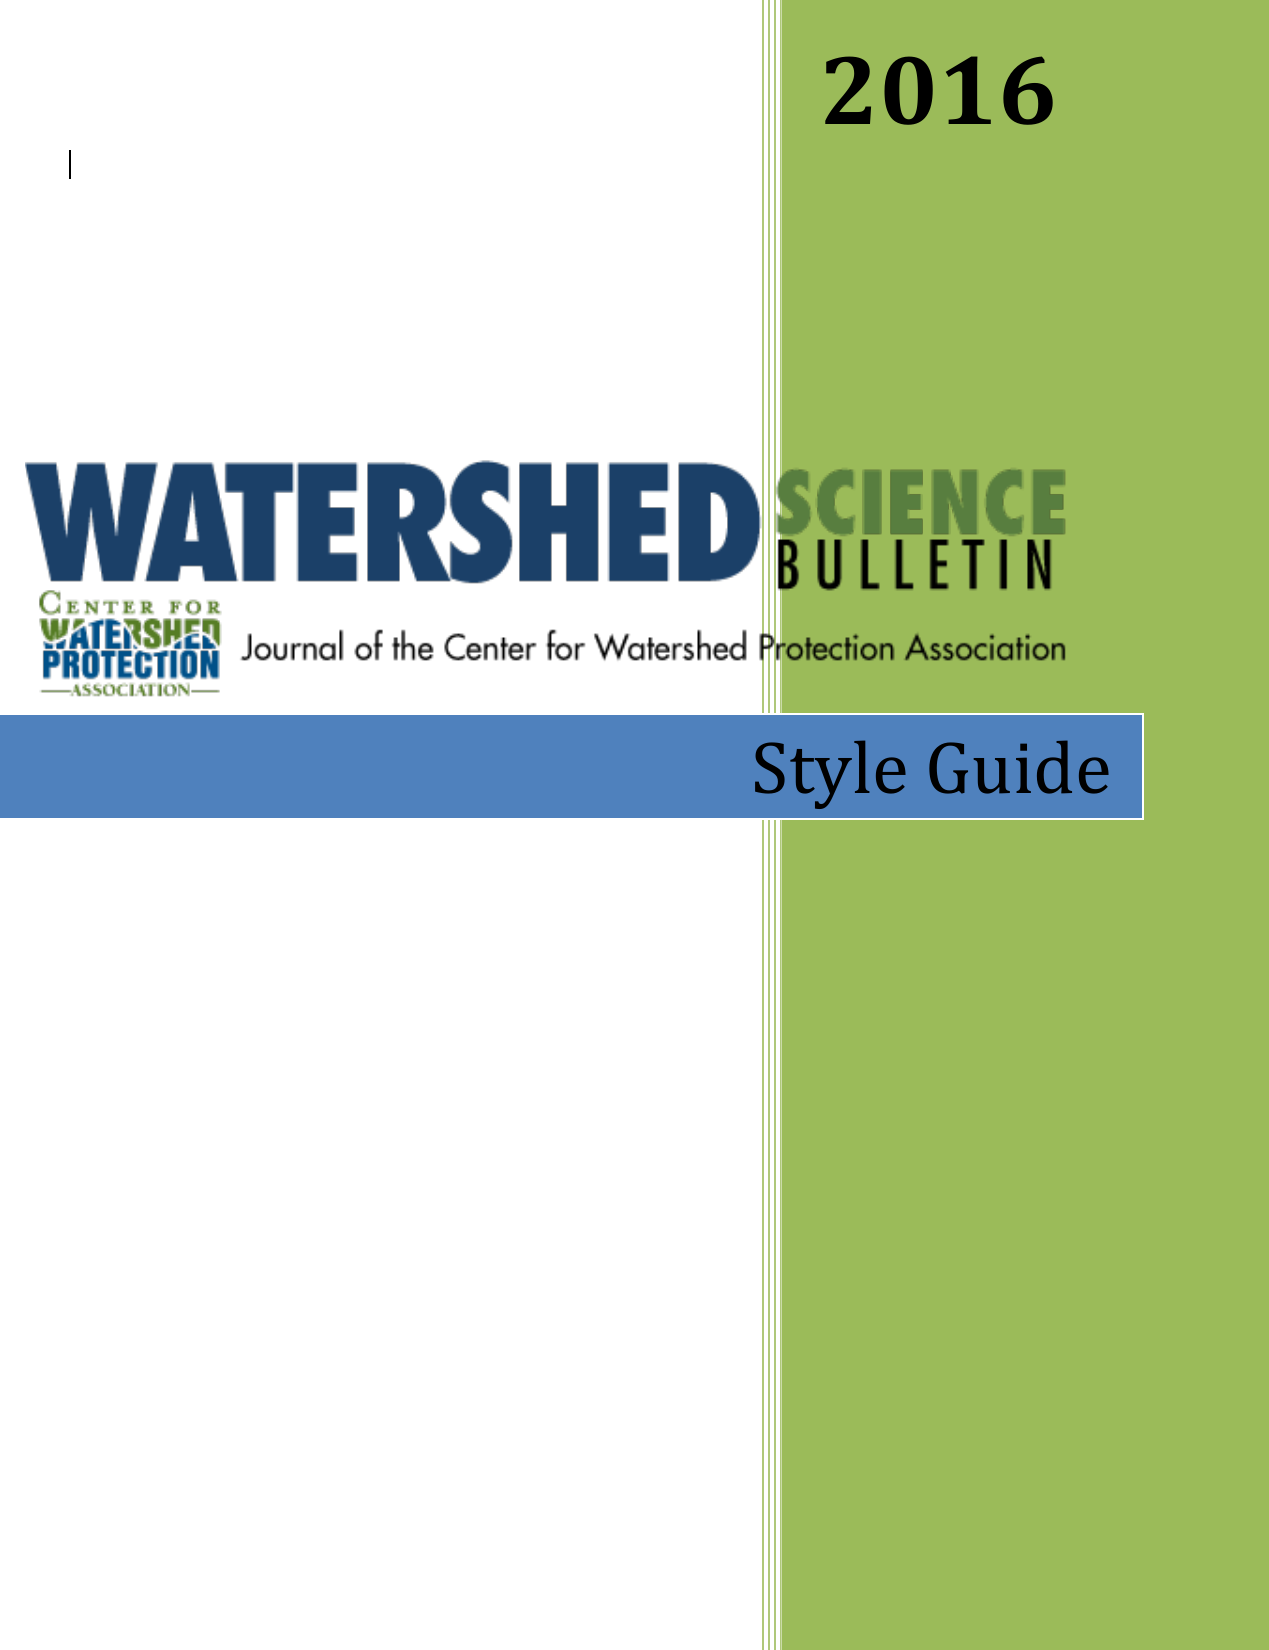 Page 1 of 12 - Style Guide Bulletin 070716